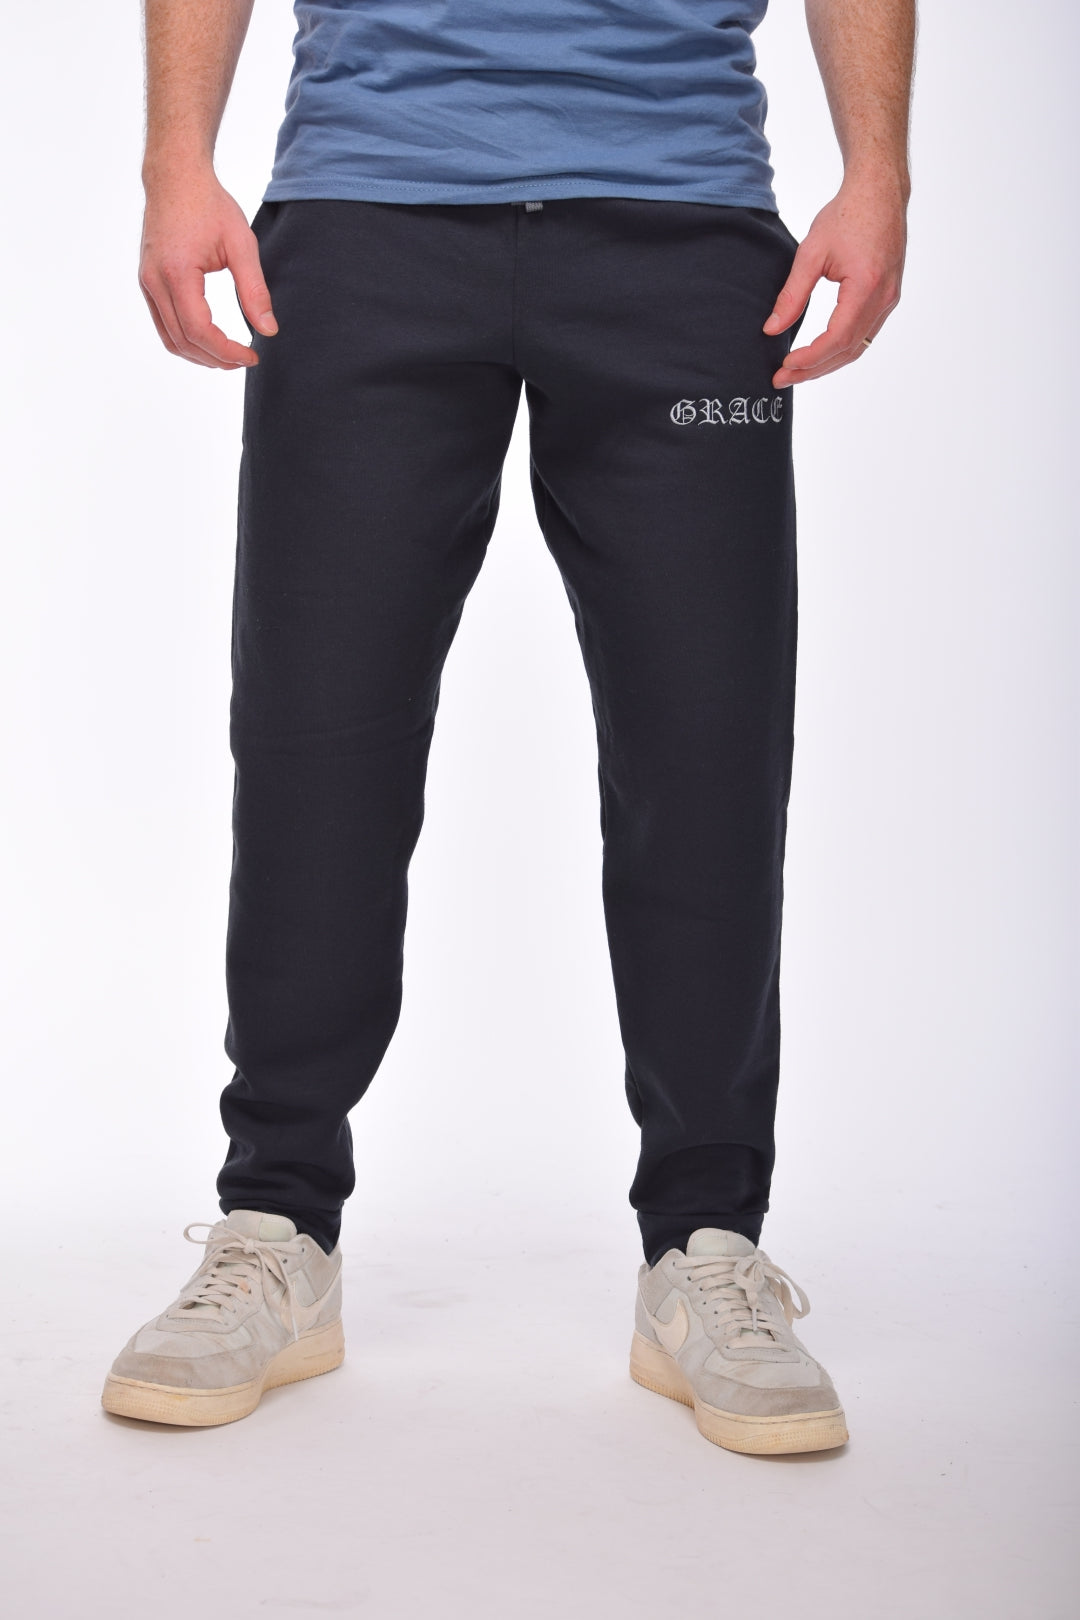 Grace Embroidered Unisex Joggers